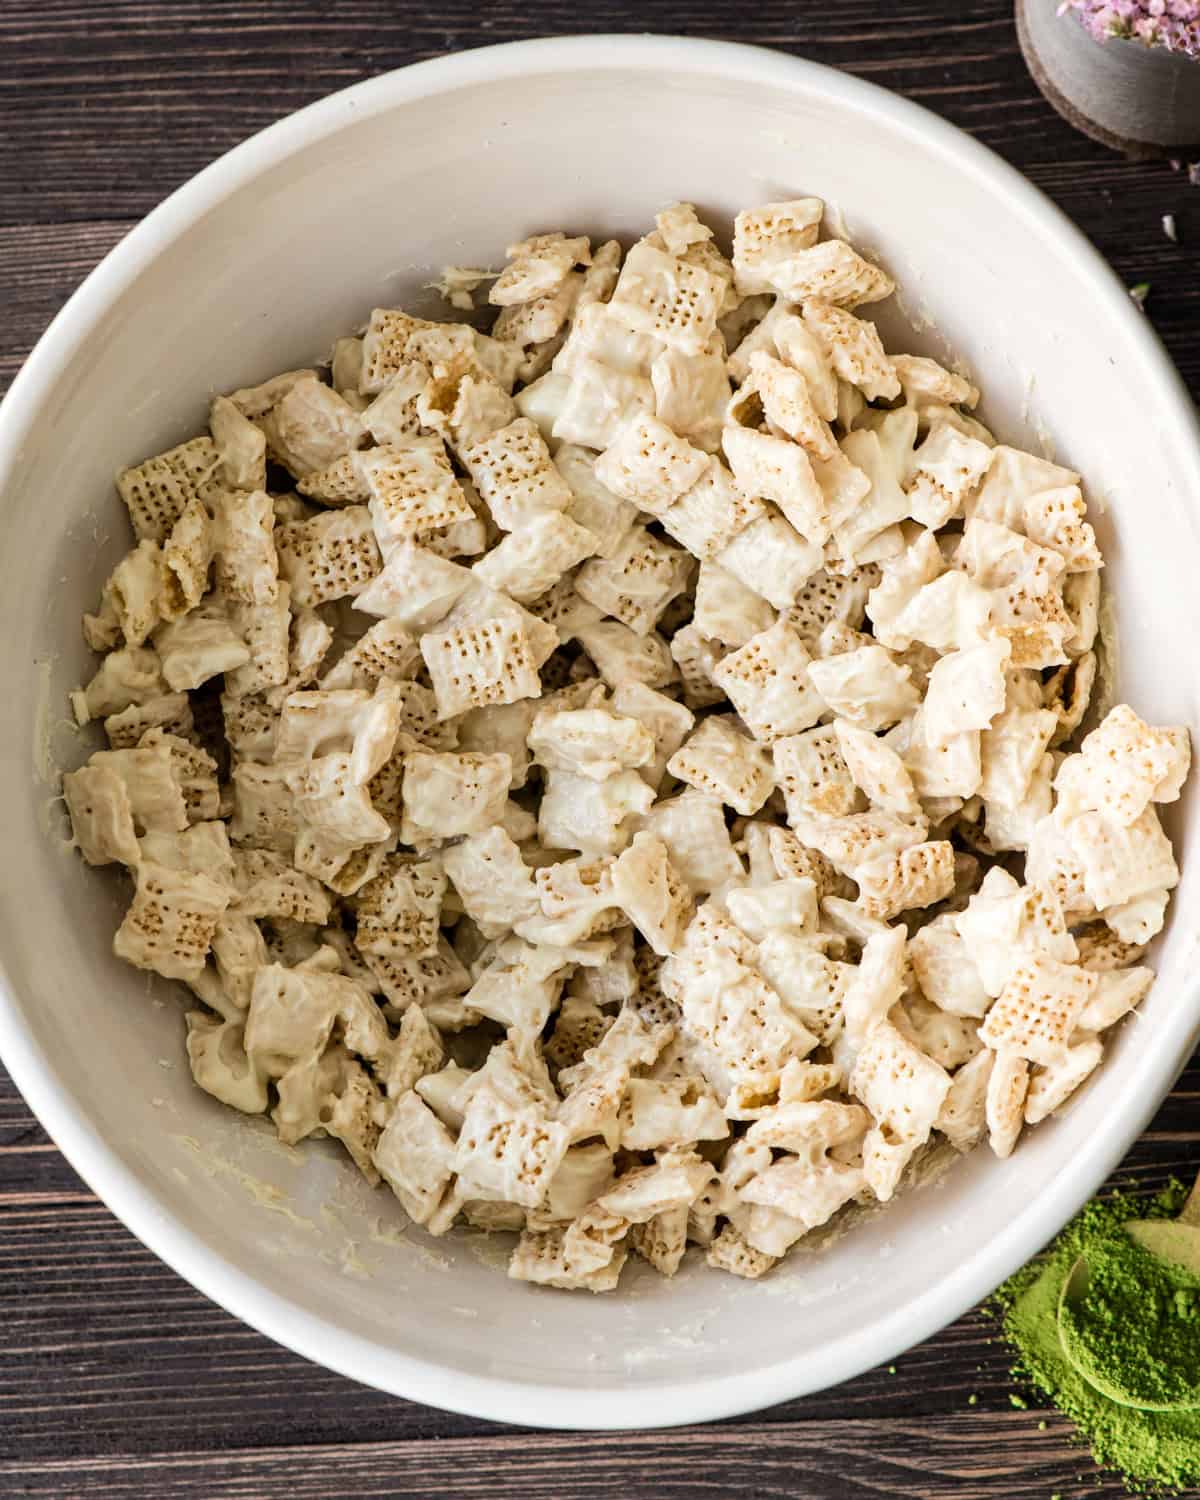 how to make Matcha Puppy Chow Recipe - white chocolate stirred into cereal